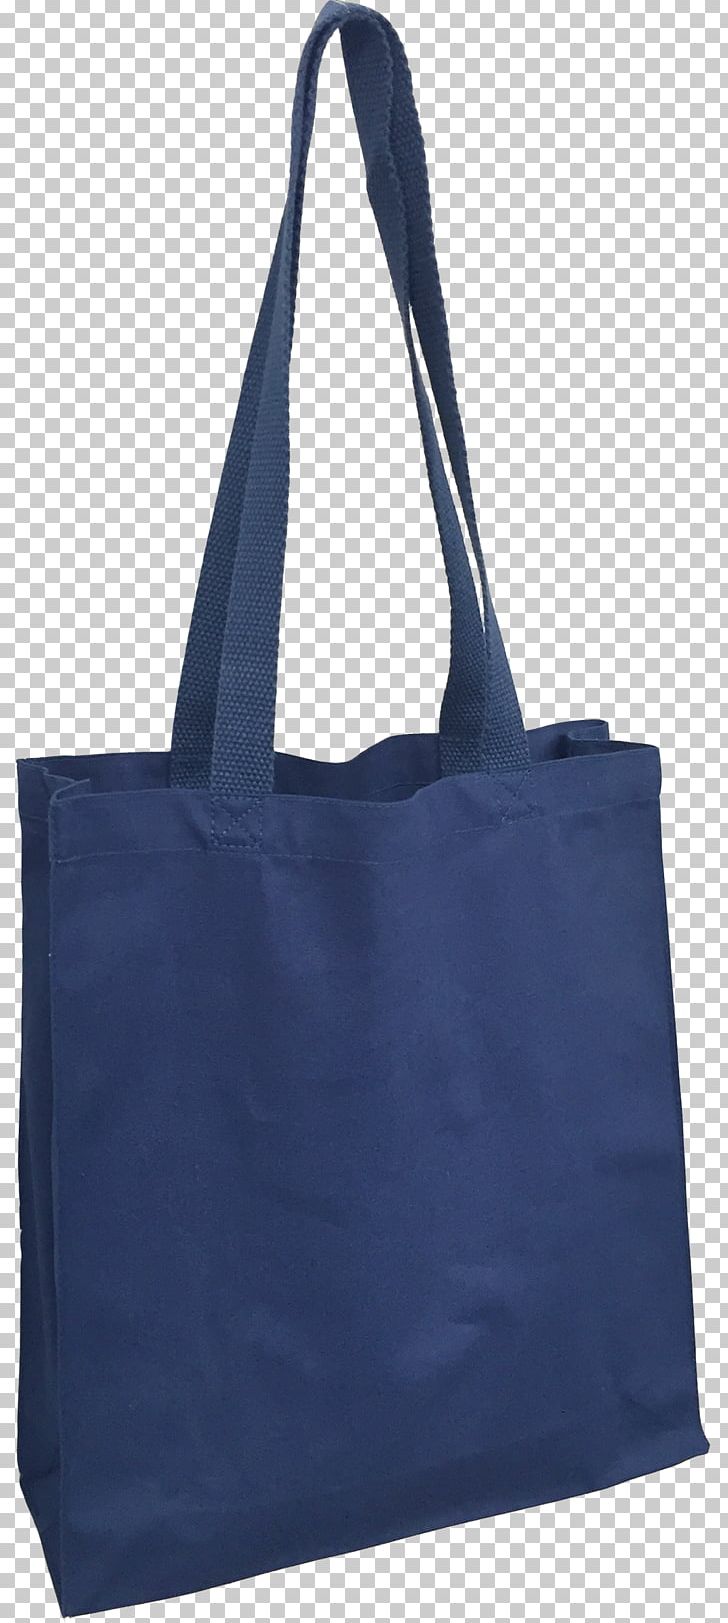 Handbag Tote Bag Leather Messenger Bags PNG, Clipart, Accessories, Artificial Leather, Bag, Baggage, Blue Free PNG Download